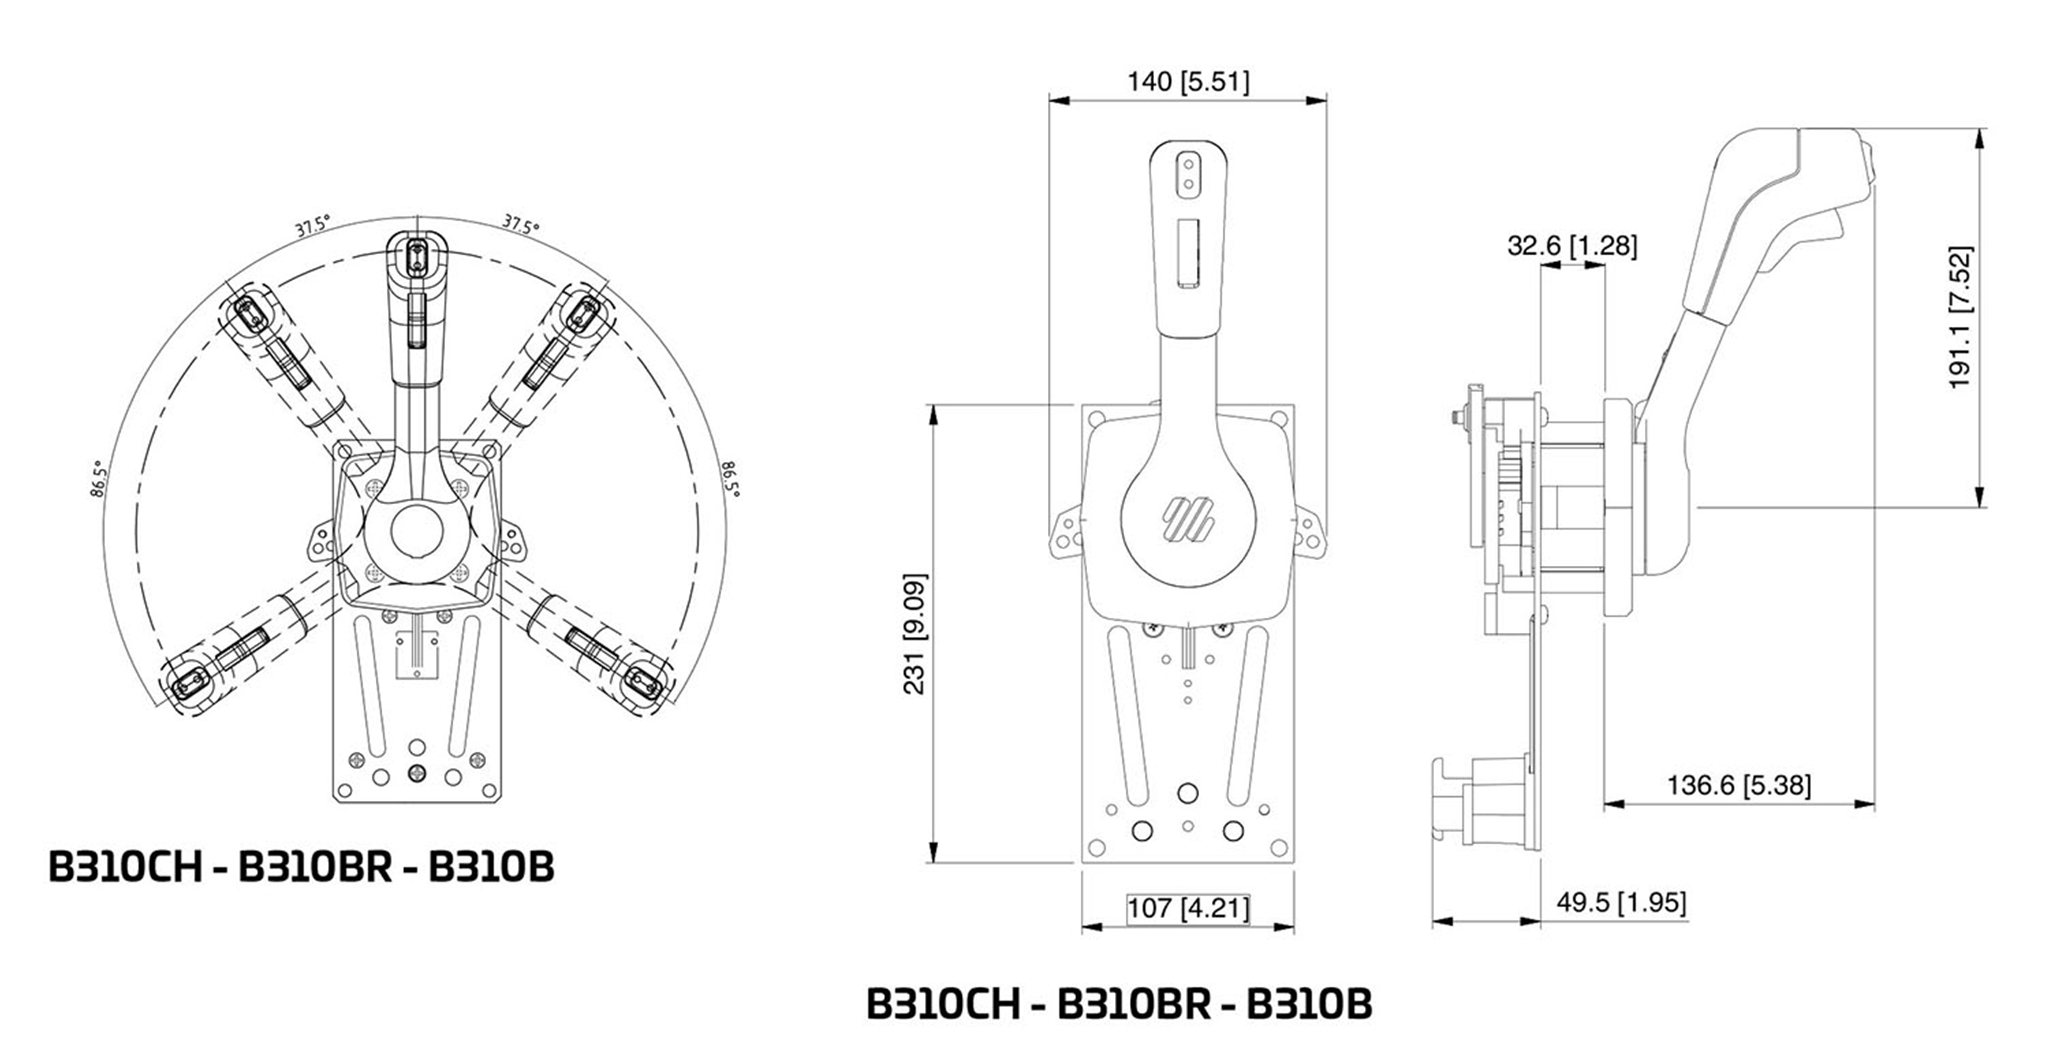 B310BR 41788 F Single Lever Side Mount Control Specifications